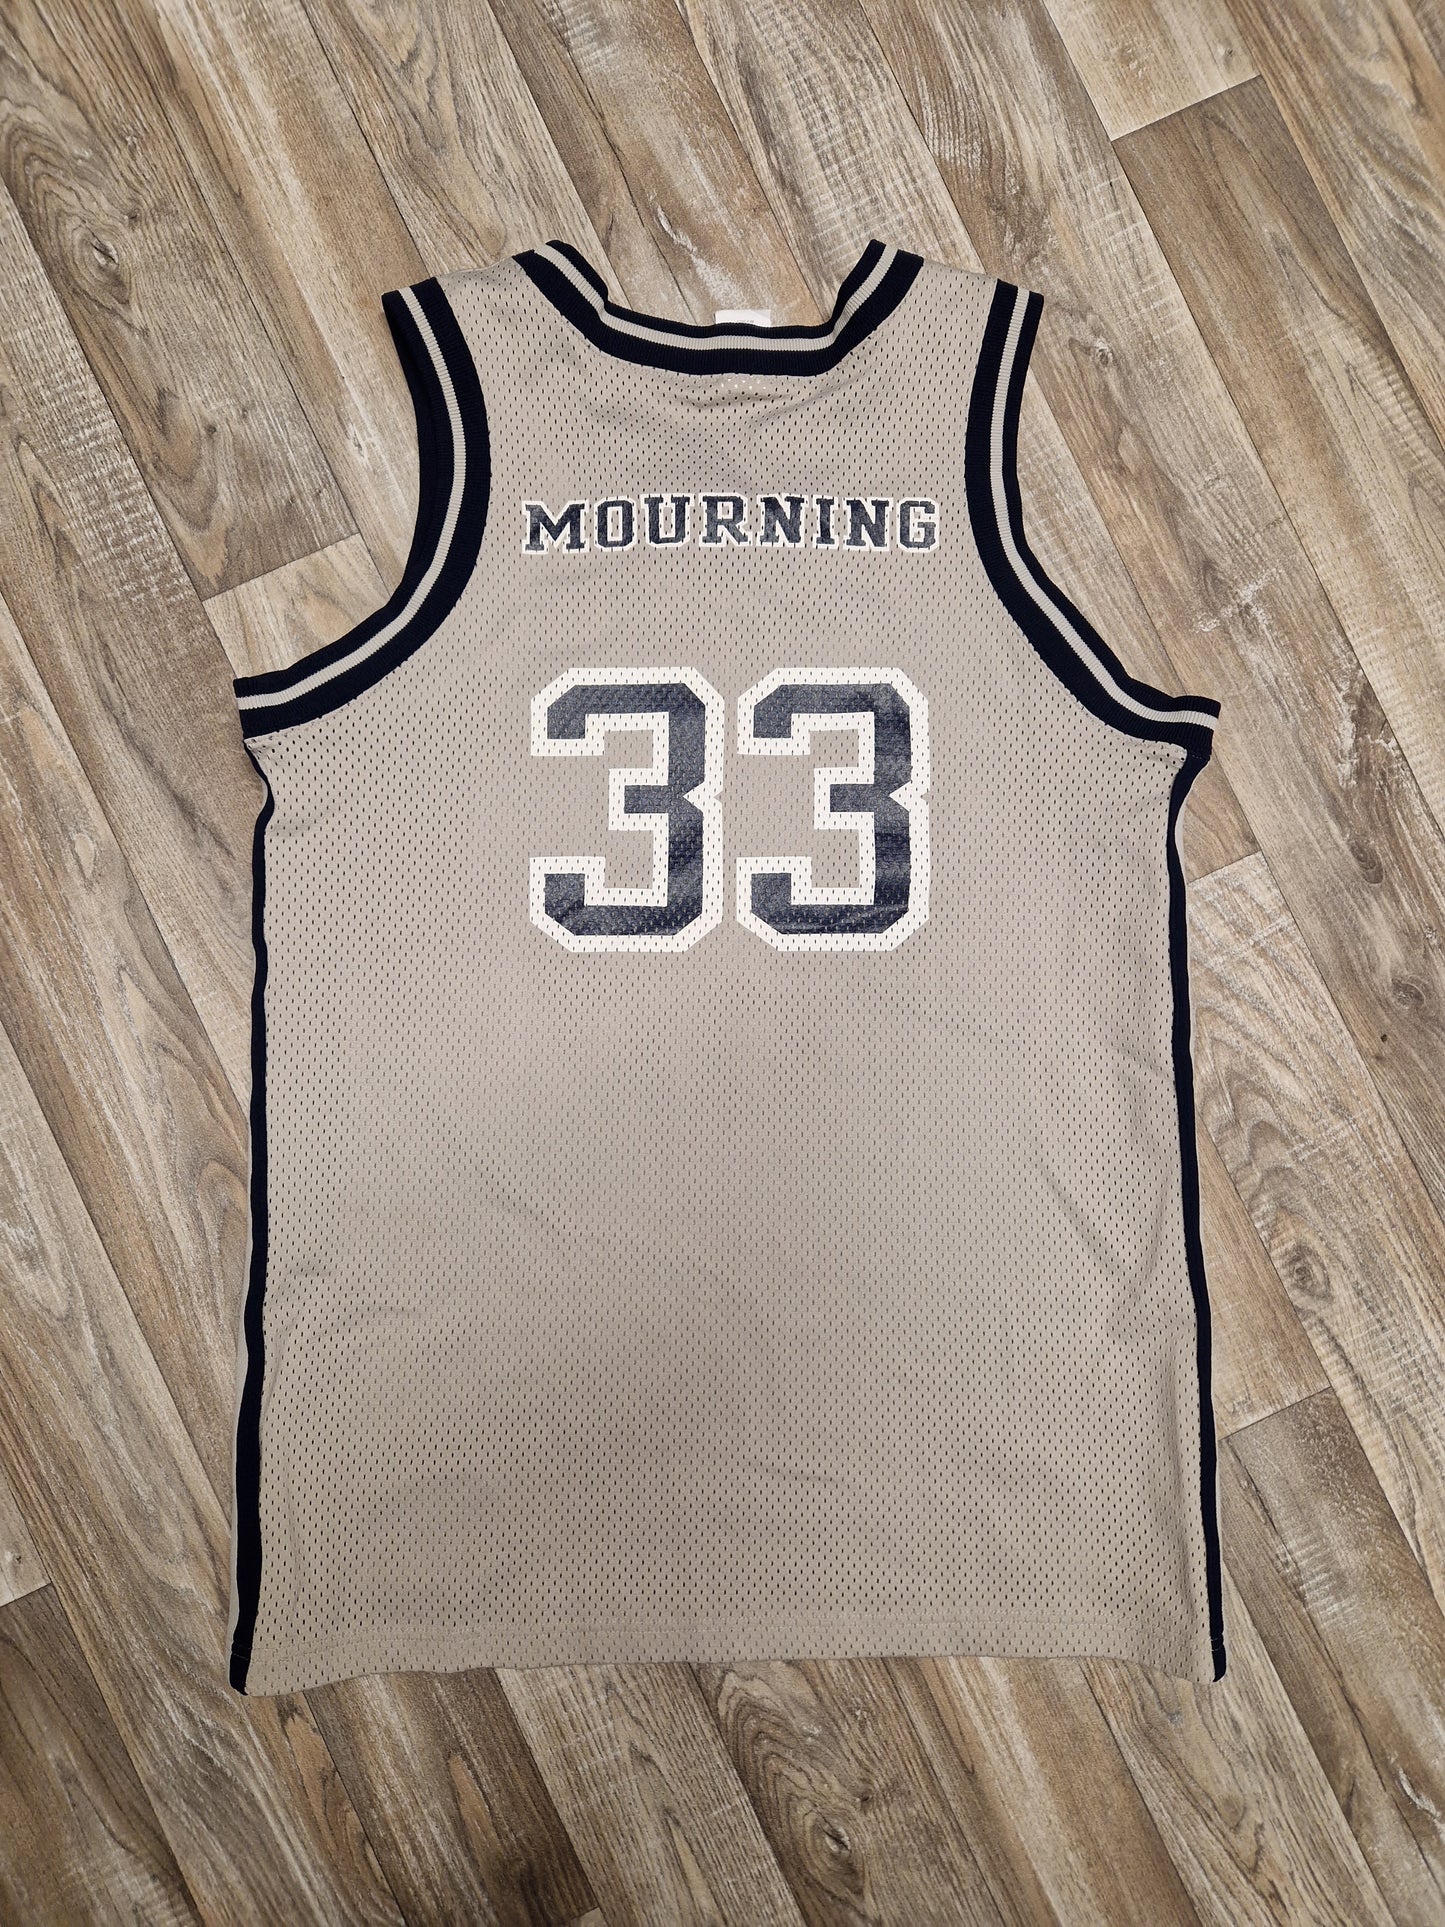 Alonzo Mourning Authentic Georgetown Hoyas Jersey Size Large